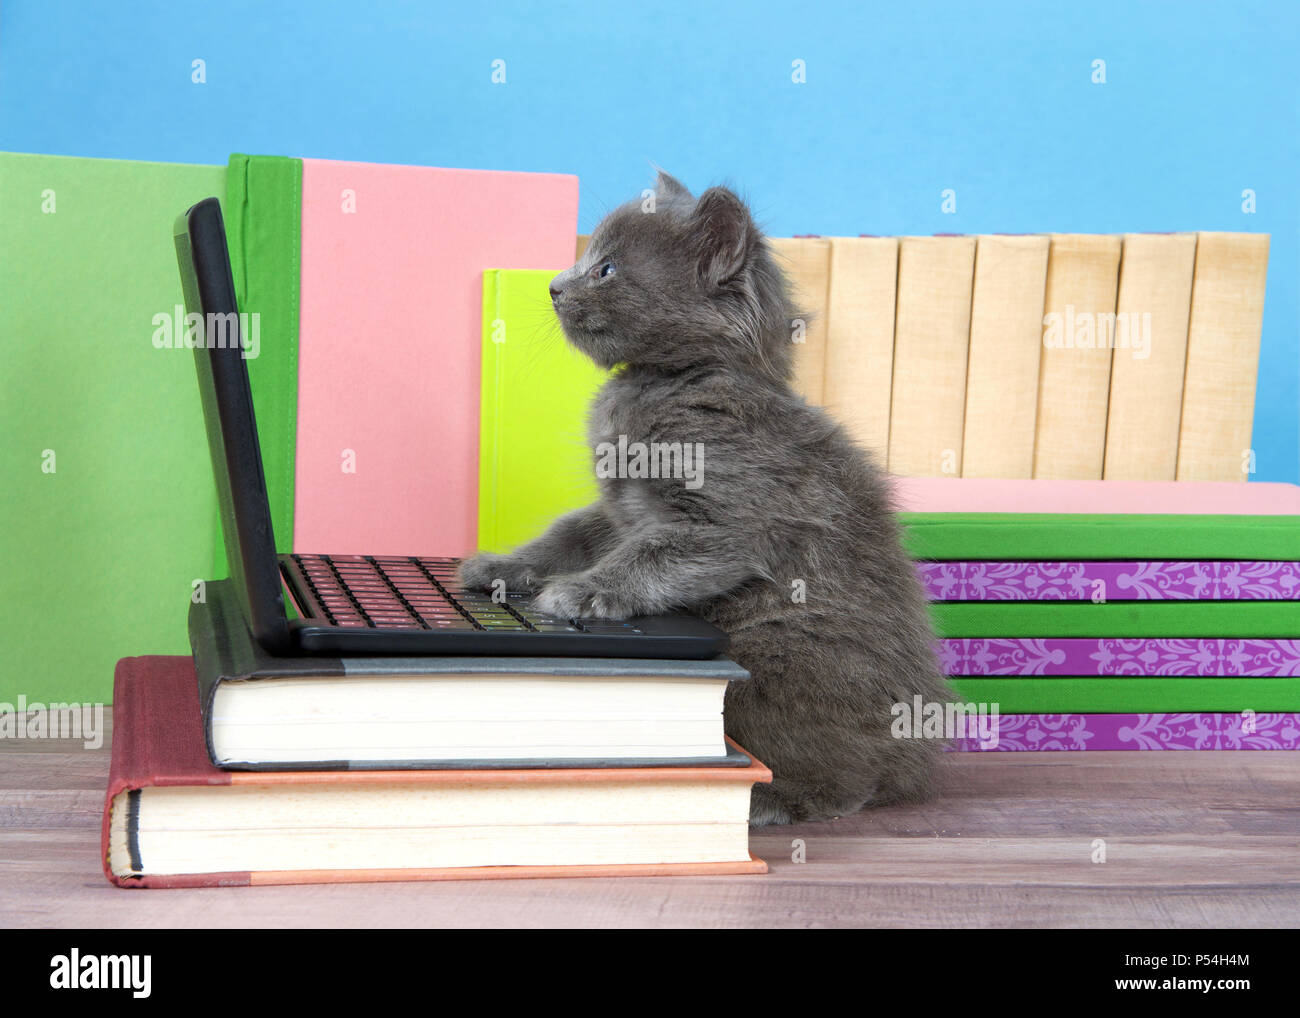 one fluffy cute small kitten sitting next to a miniature laptop computer on a desk of books with books behind, wood floor, blue wall background. Paws  Stock Photo